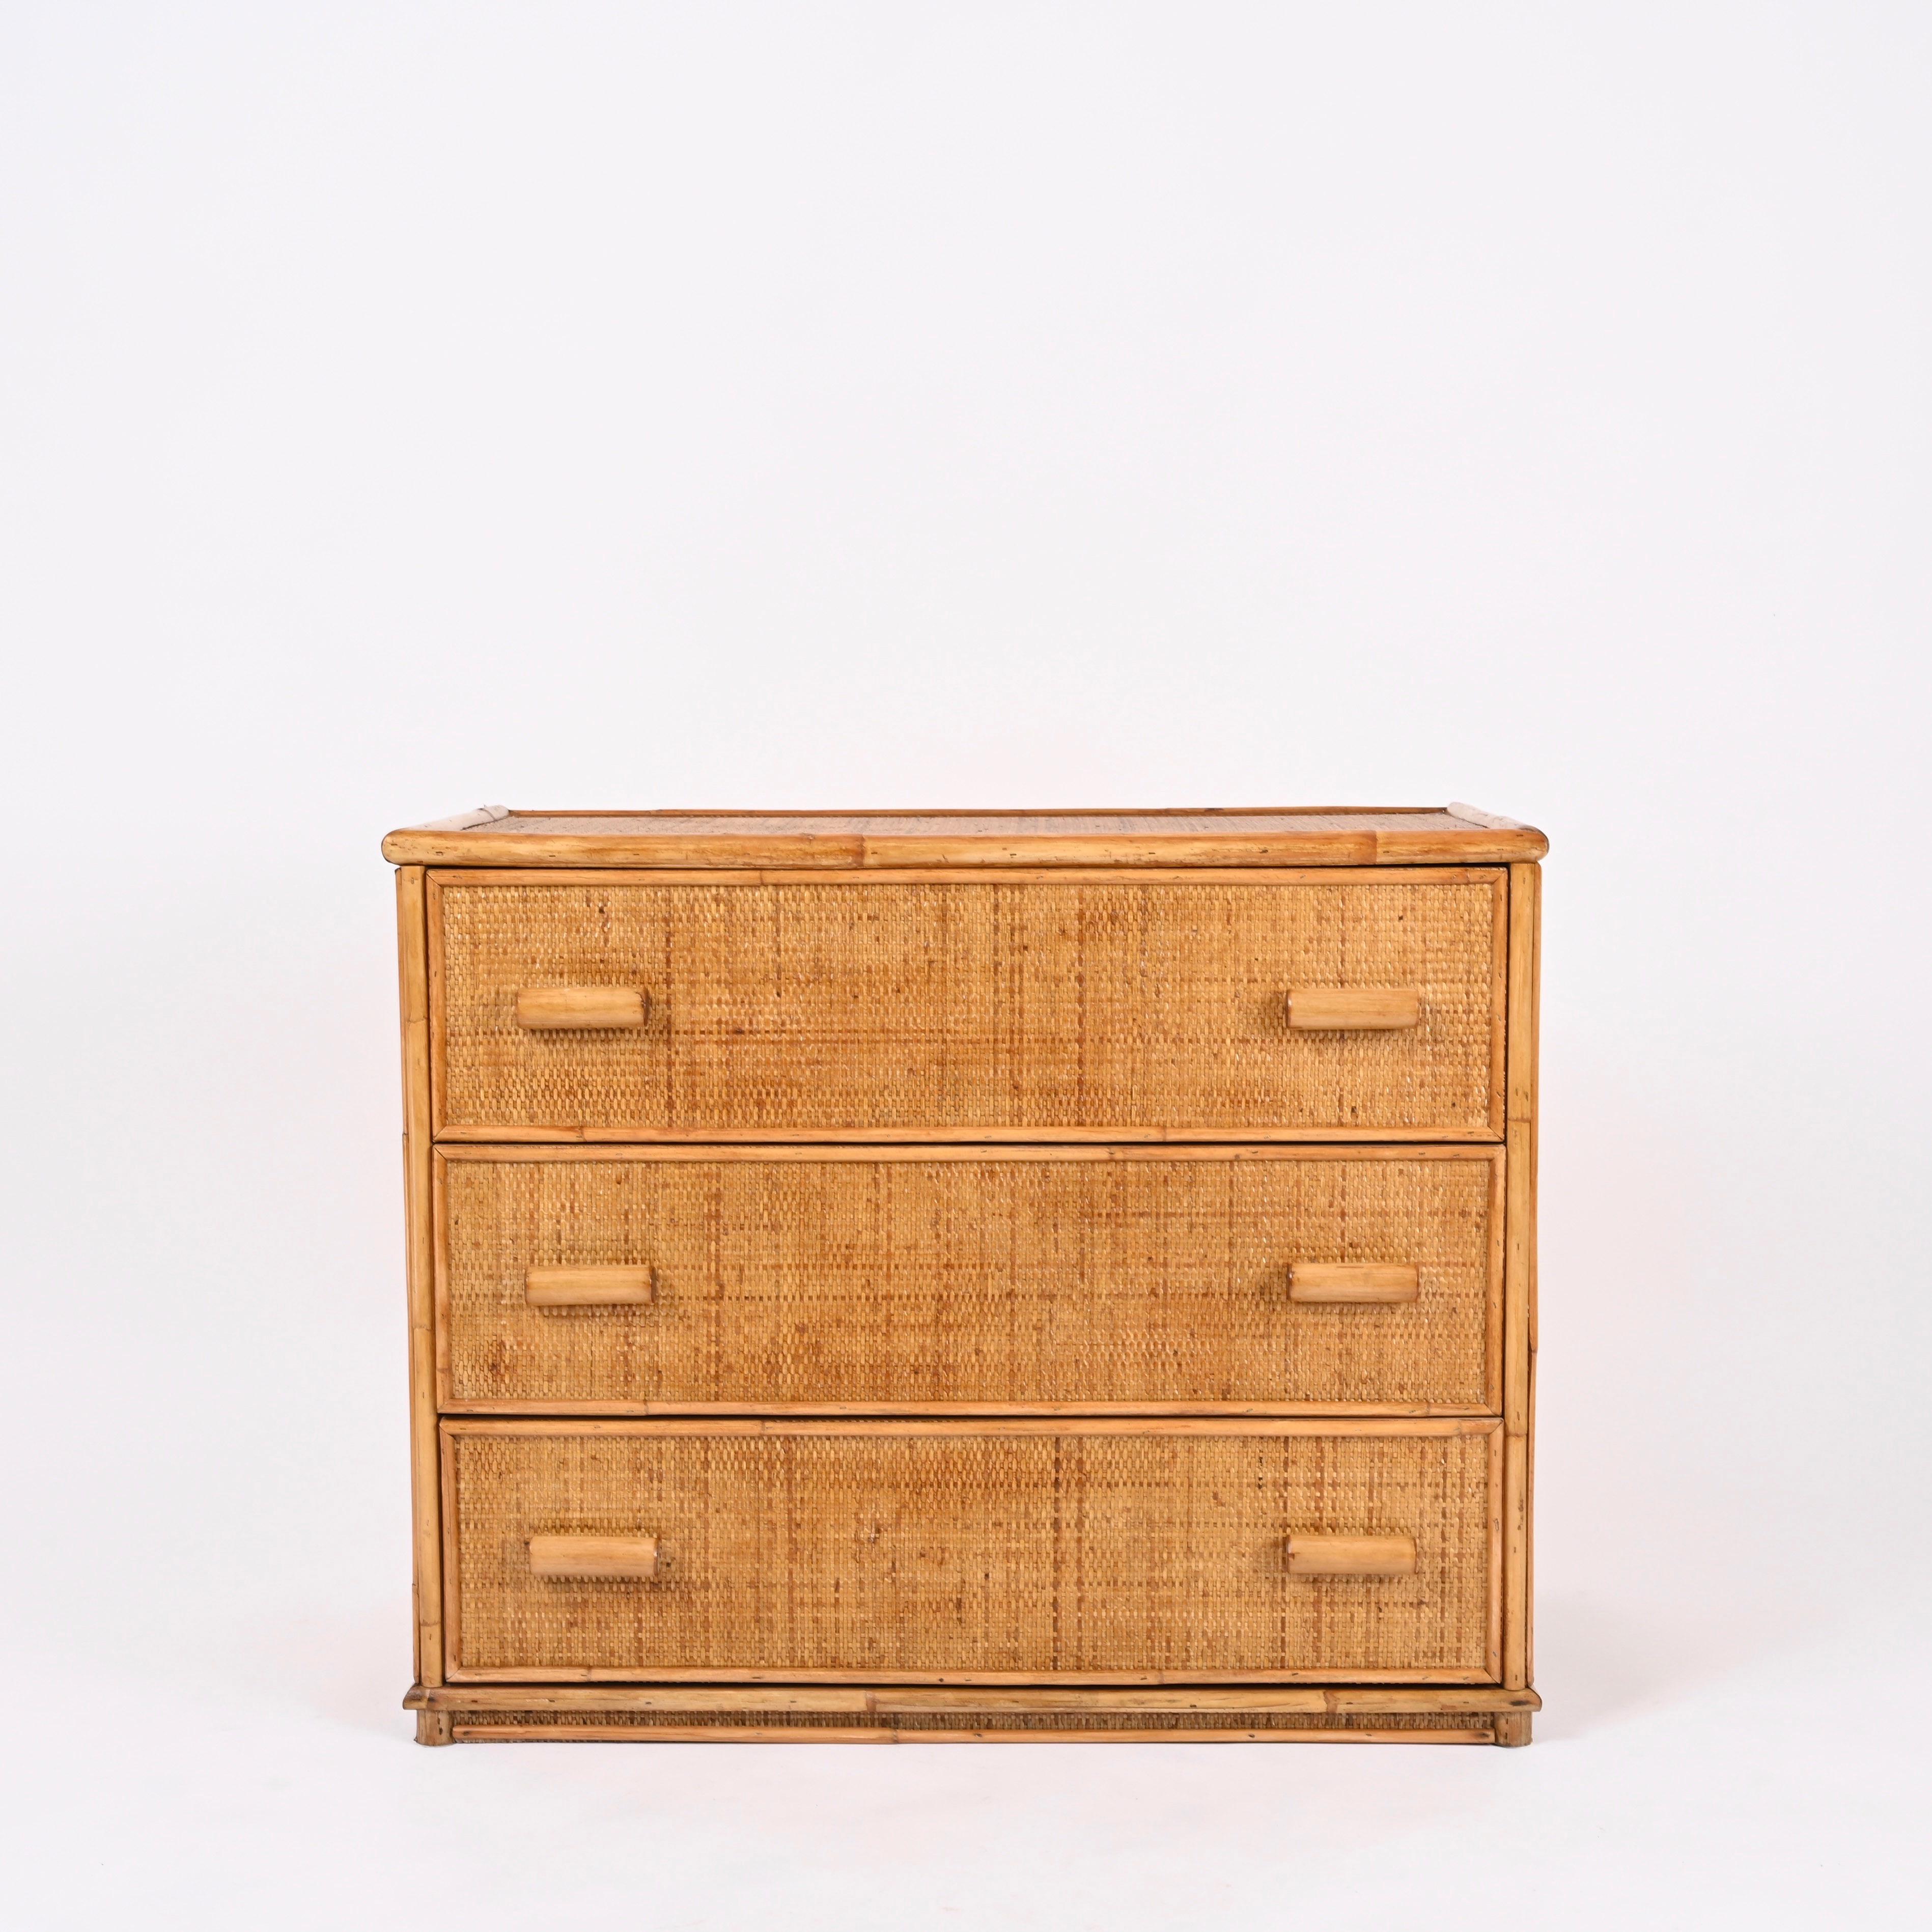 Stunning mid-century French Riviera chest of drawers fully made in rattan and bamboo. This lovely item was produced in Italy during the 1970s.

This striking three-drawer chest has a rectangular structure made in sturdy bamboo, the rest of the